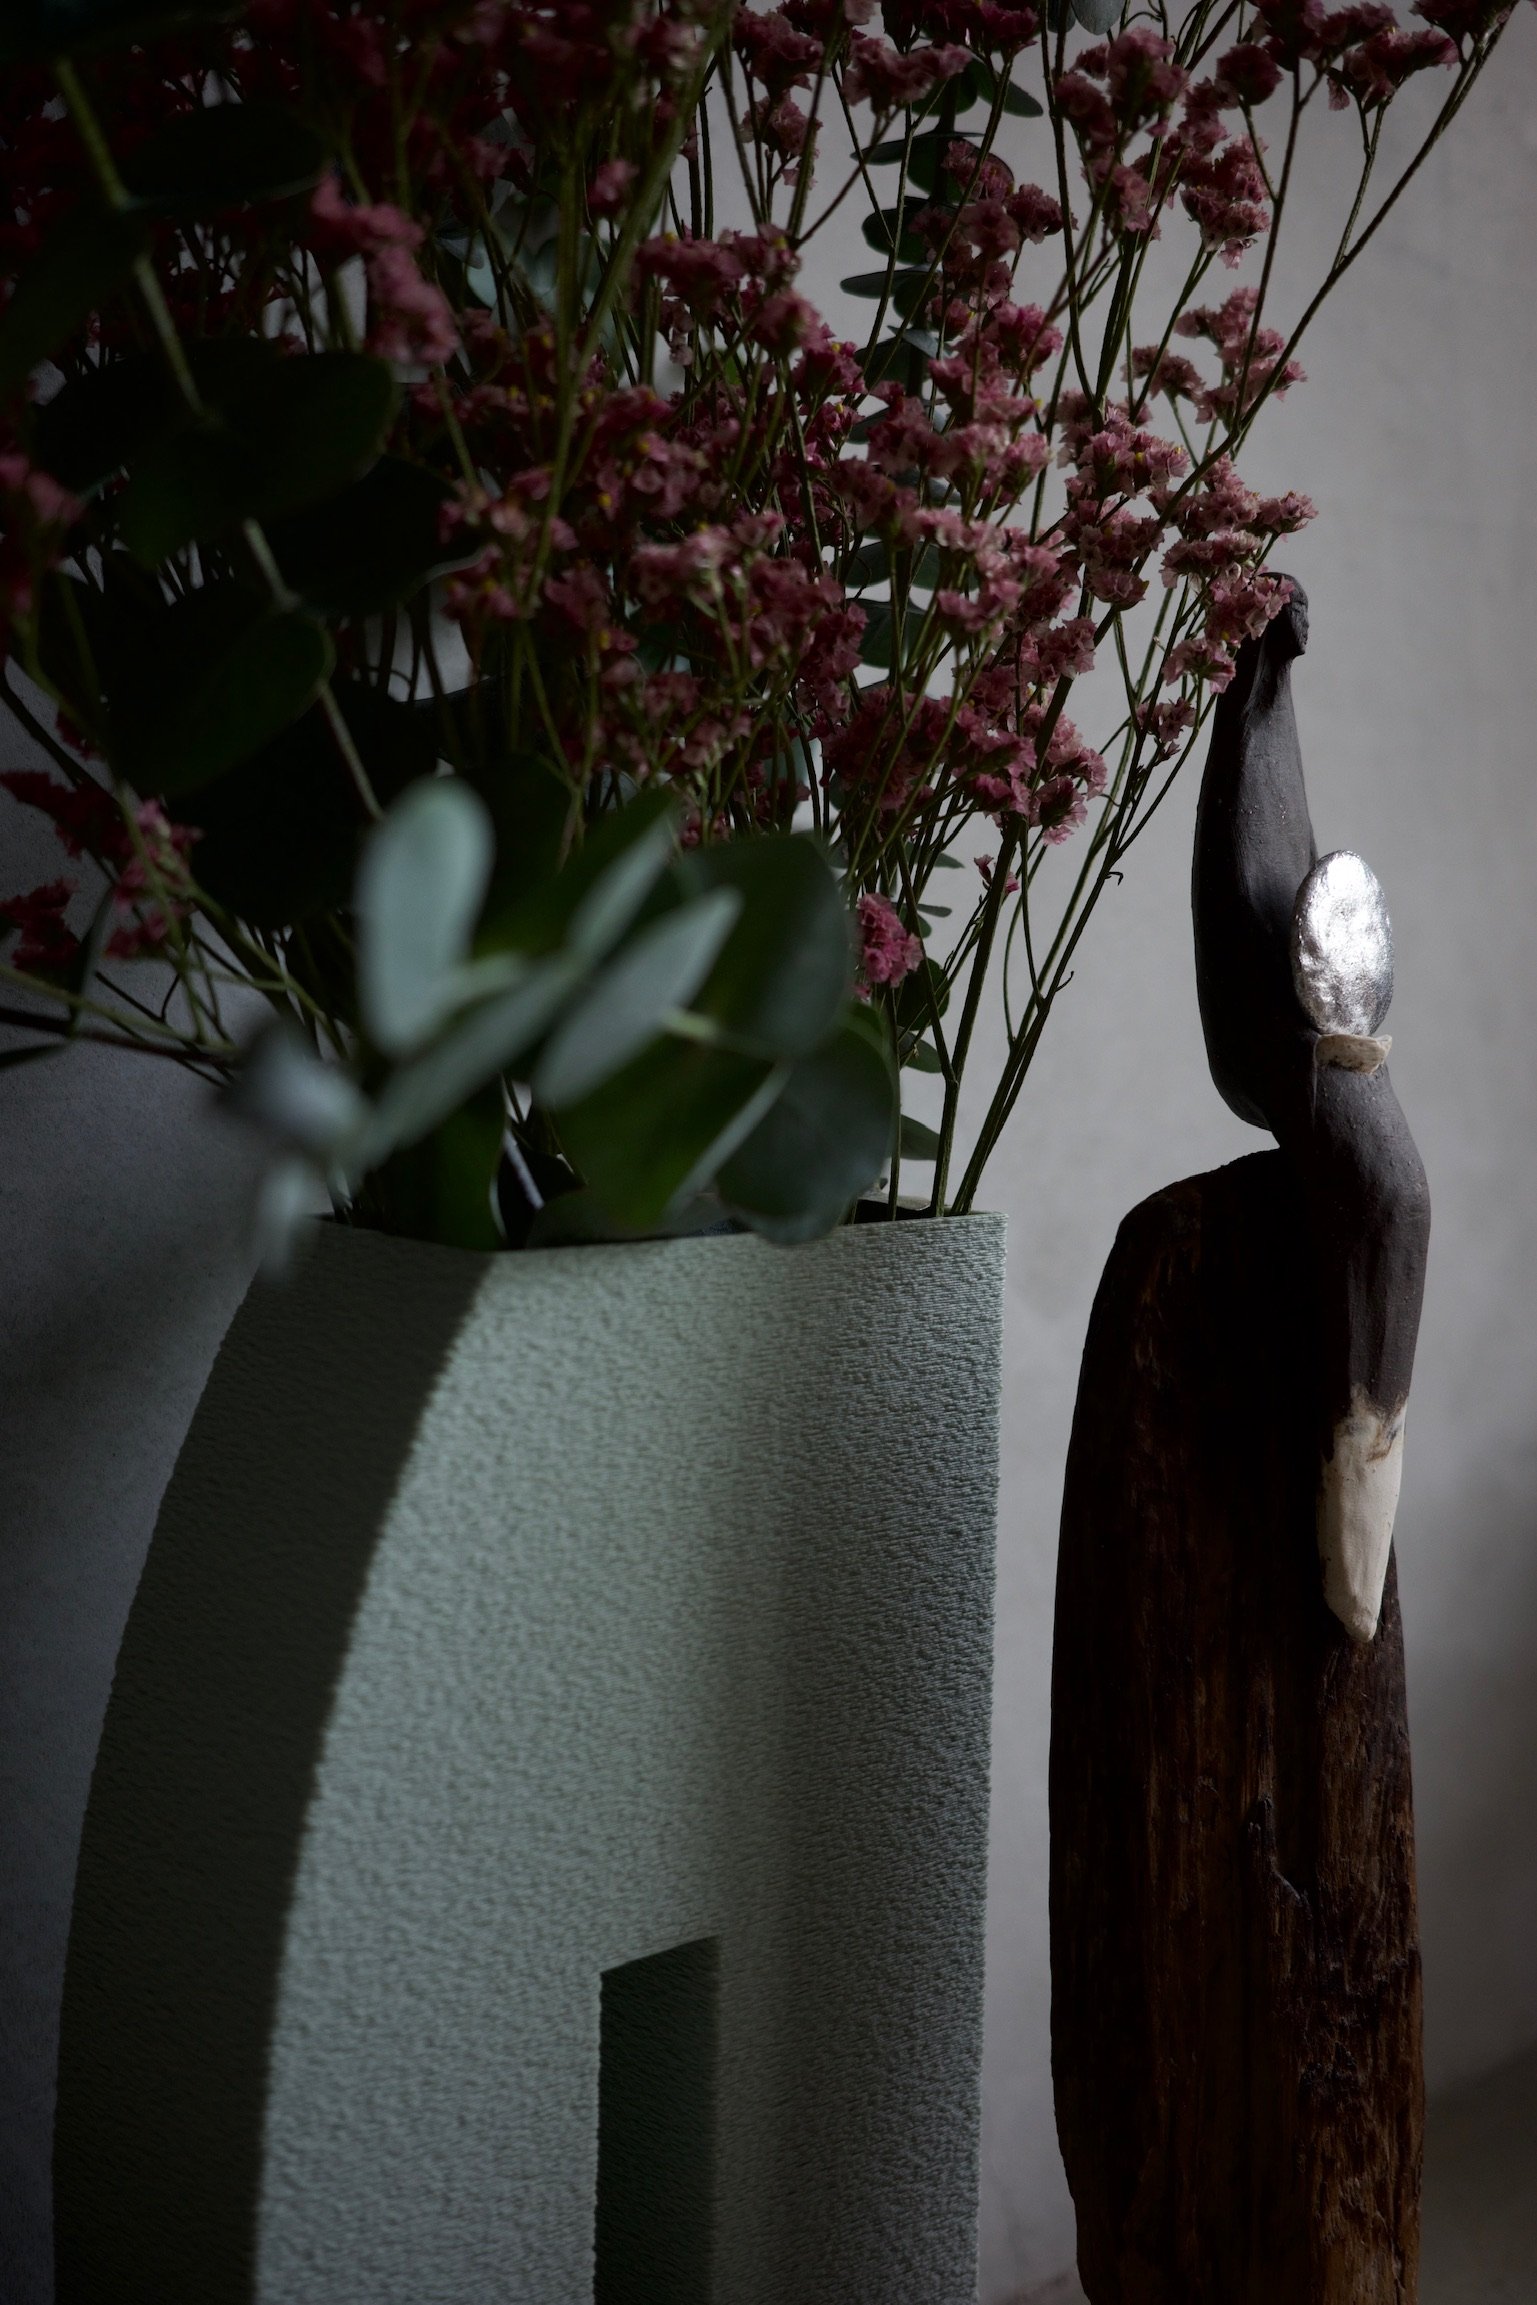 A sculpture of a woman sitting on a block of wood holding a silver disc. Behind her, a textured 3D printed curved vase with flowers and eucalyptus.